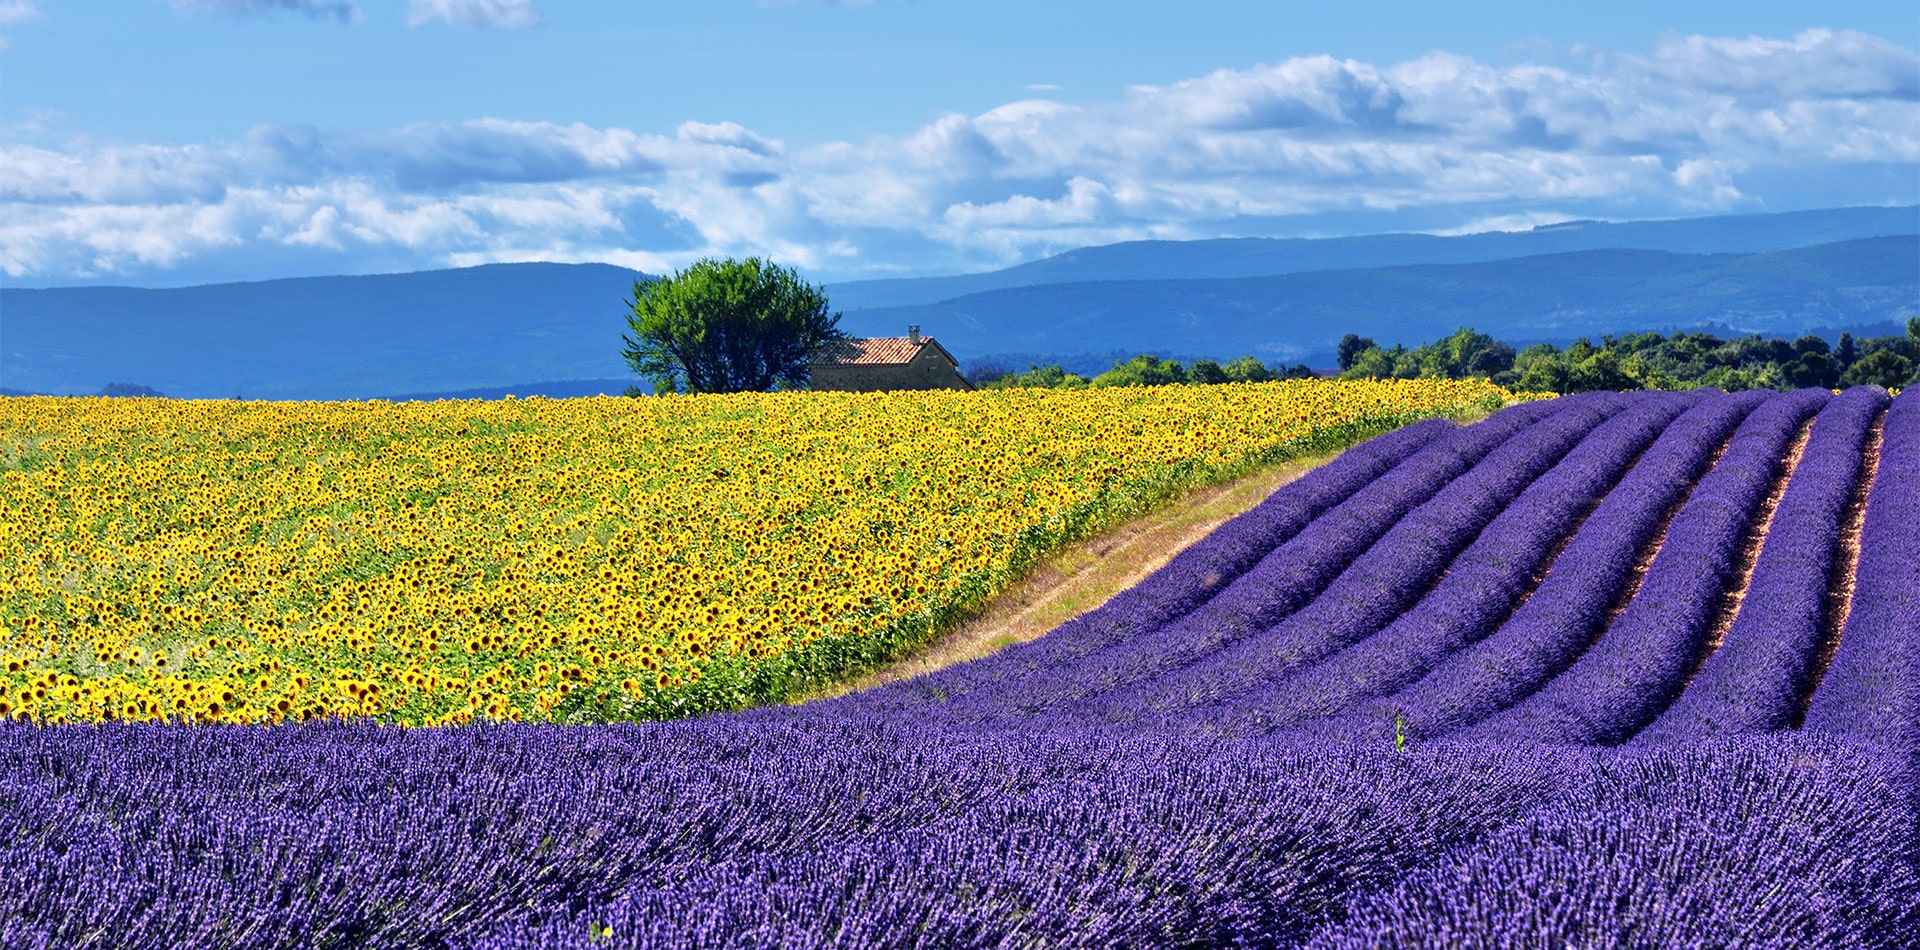 Lavender and sunflower fields in France